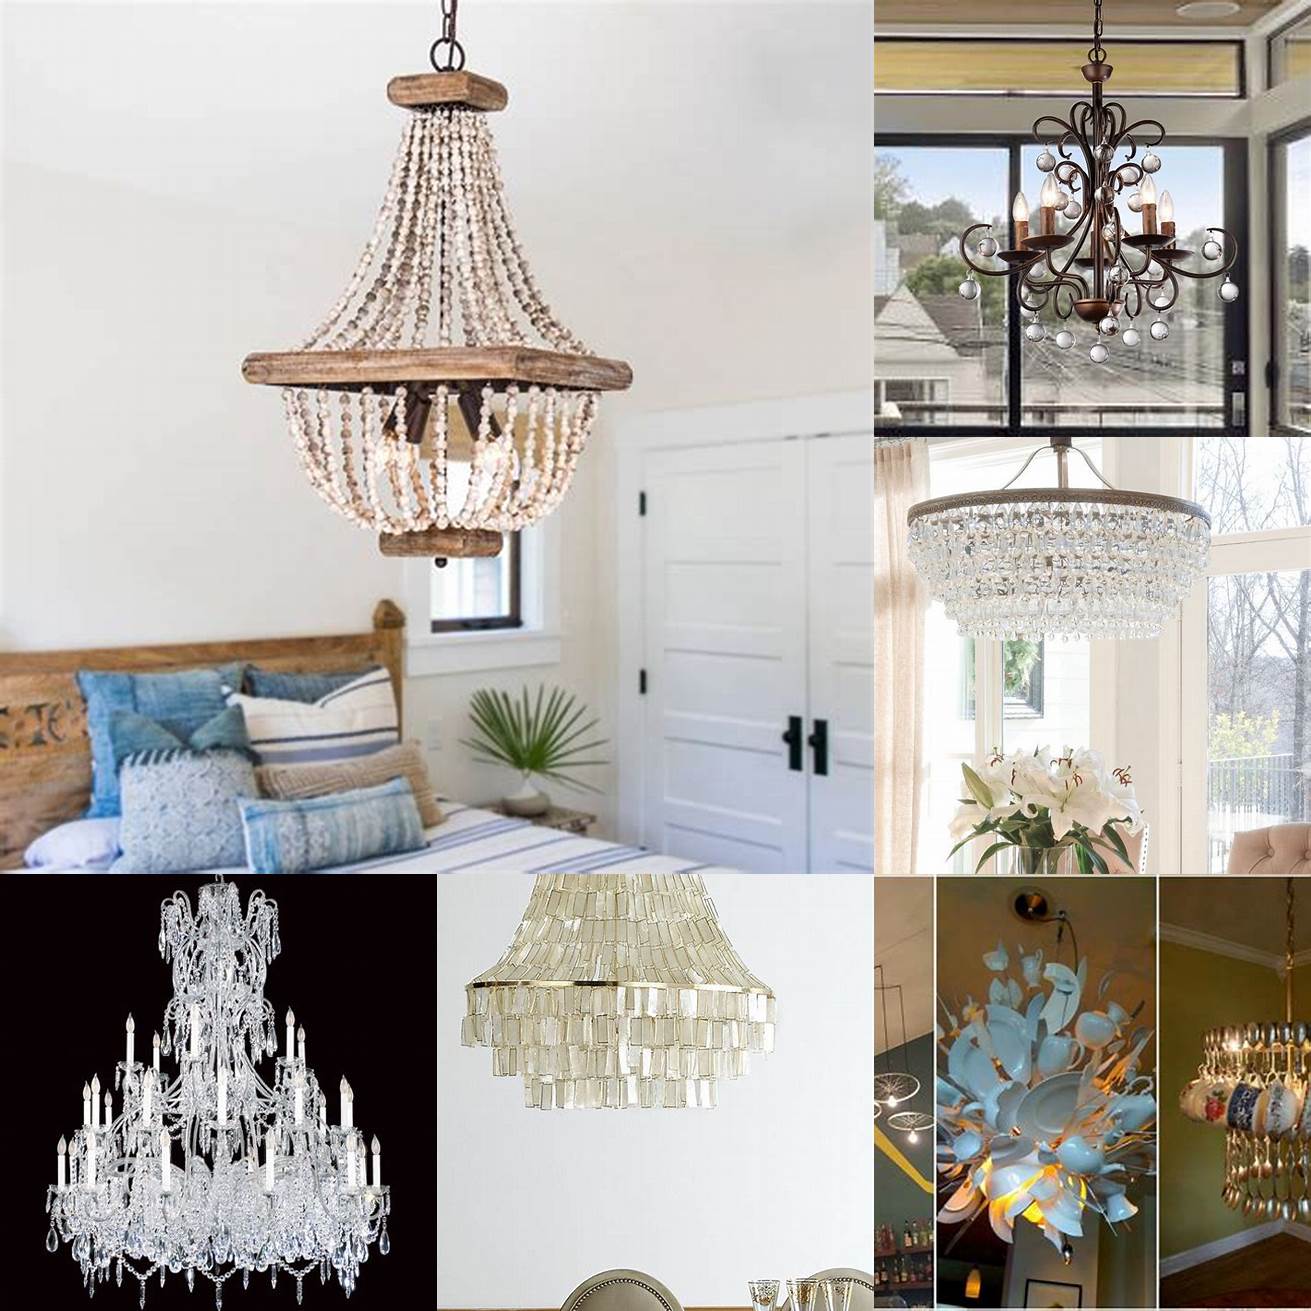 Chandeliers a glamorous choice for those who want to make a statement